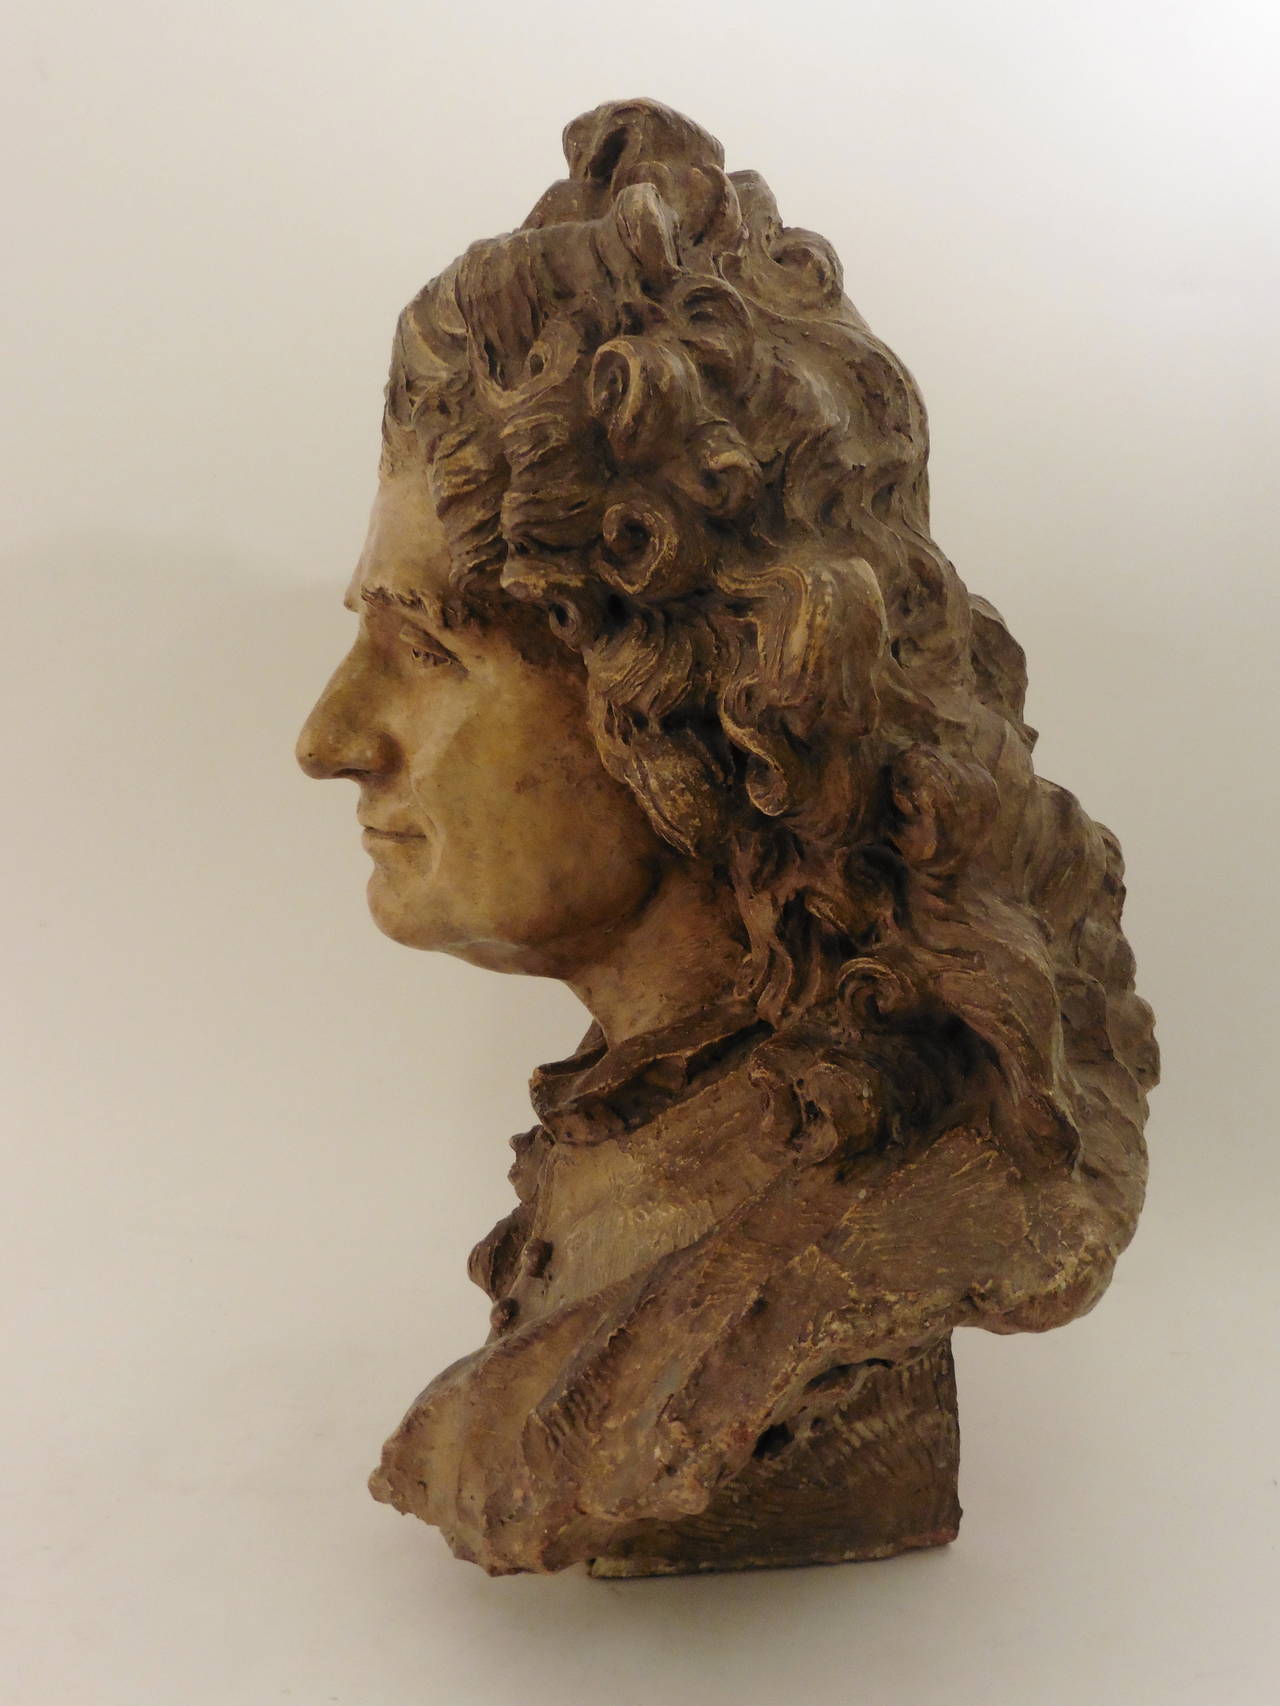 A fine French Louis XVI large terracotta bust of a nobleman, thought to be Jean La Fontaine c1780.